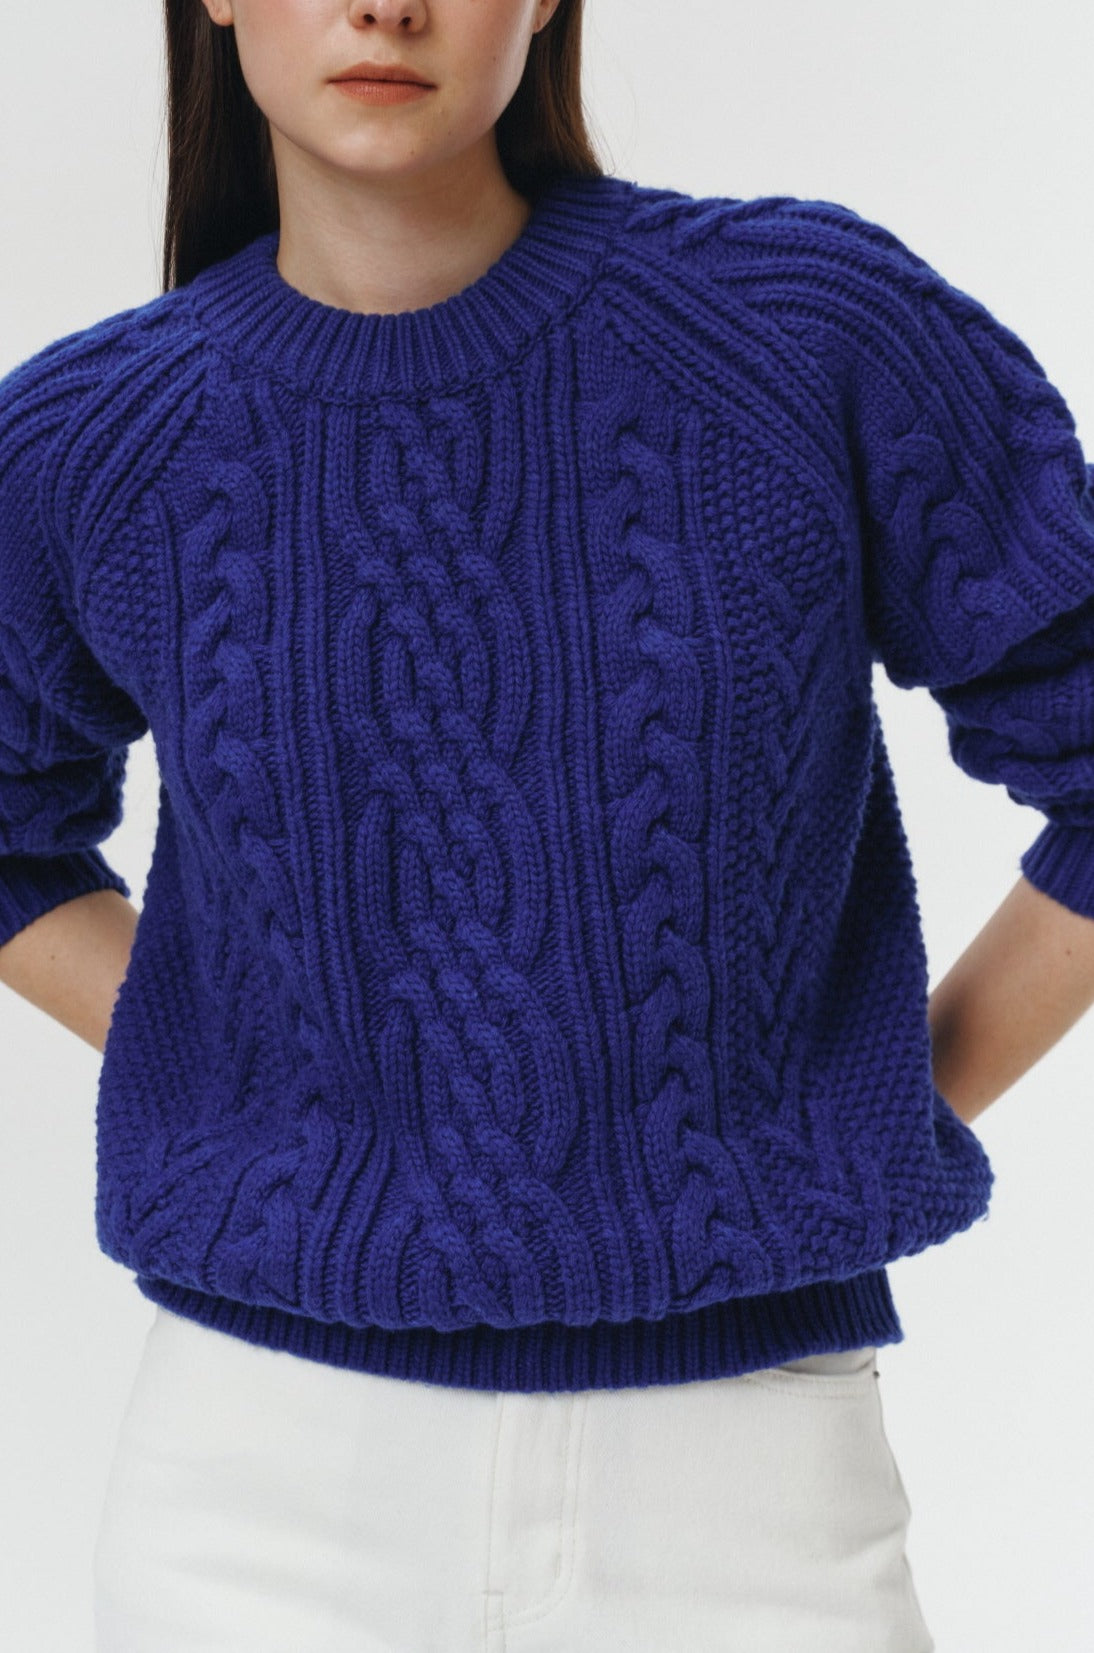 Dunst unisex thick cable knit pattern crewneck saturated royal blue | Pipe and Row